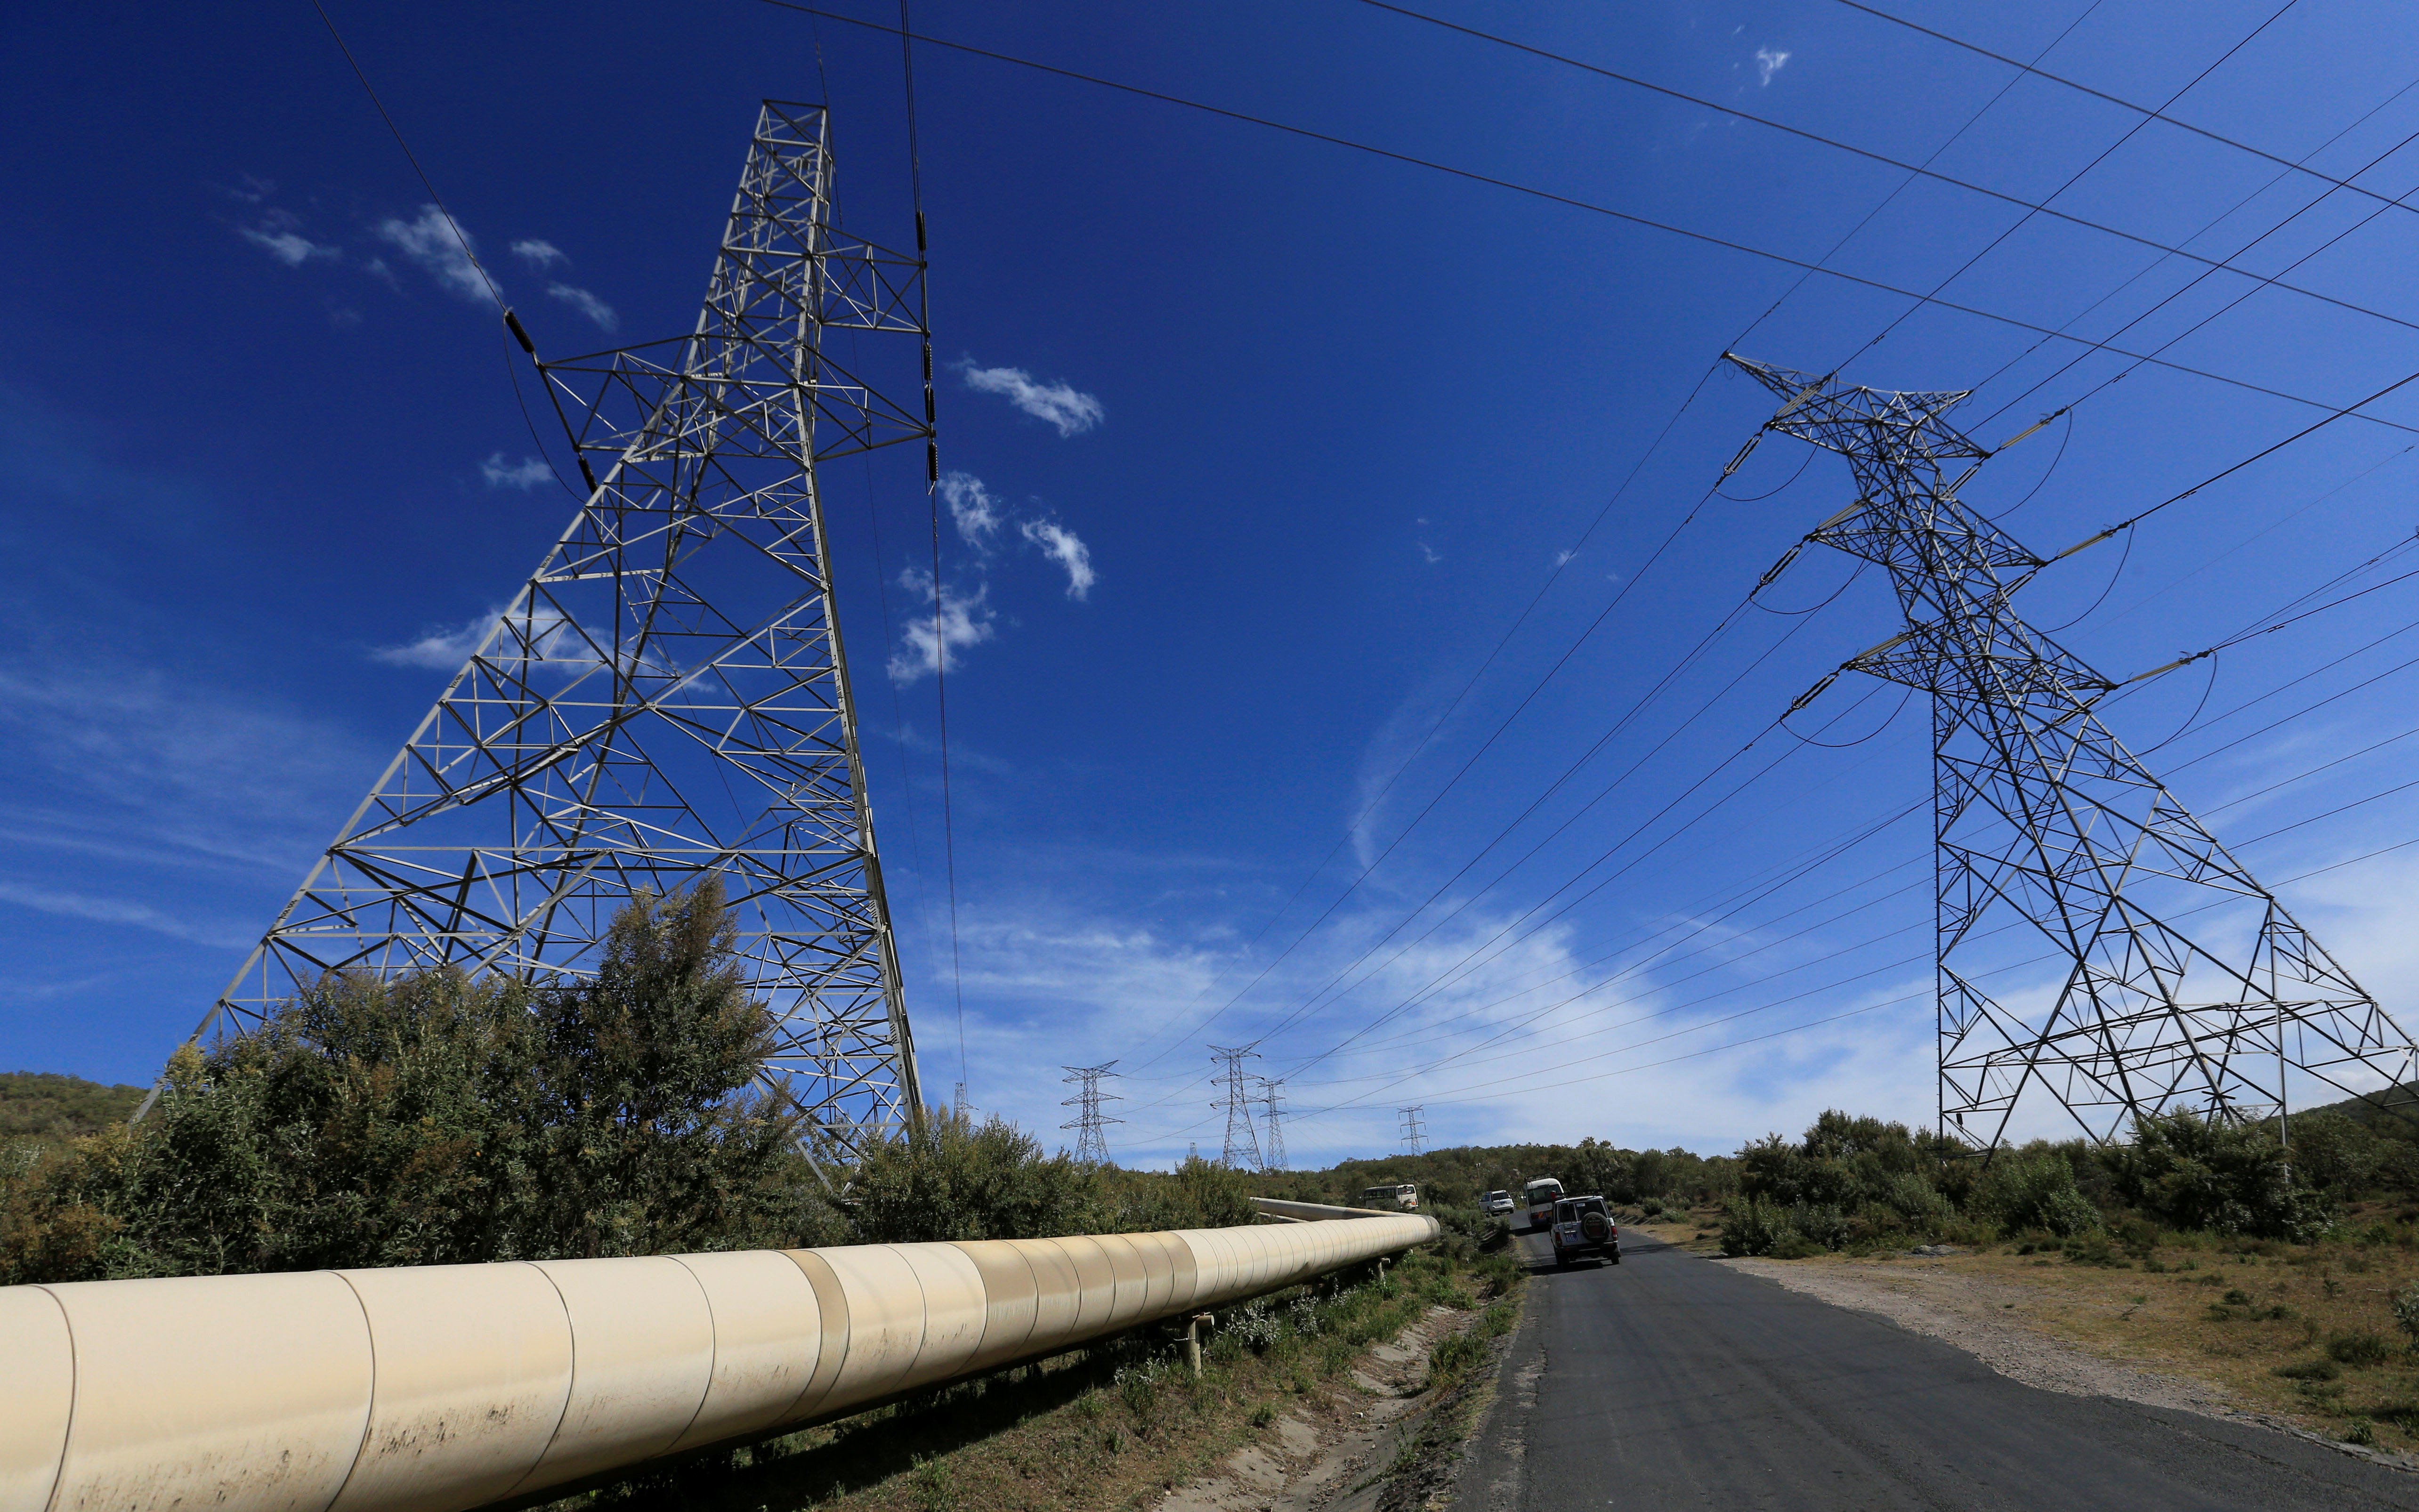 Pylons of high-tension electricity power lines are seen at the Olkaria II Geothermal power plant near the Rift Valley town of Naivasha